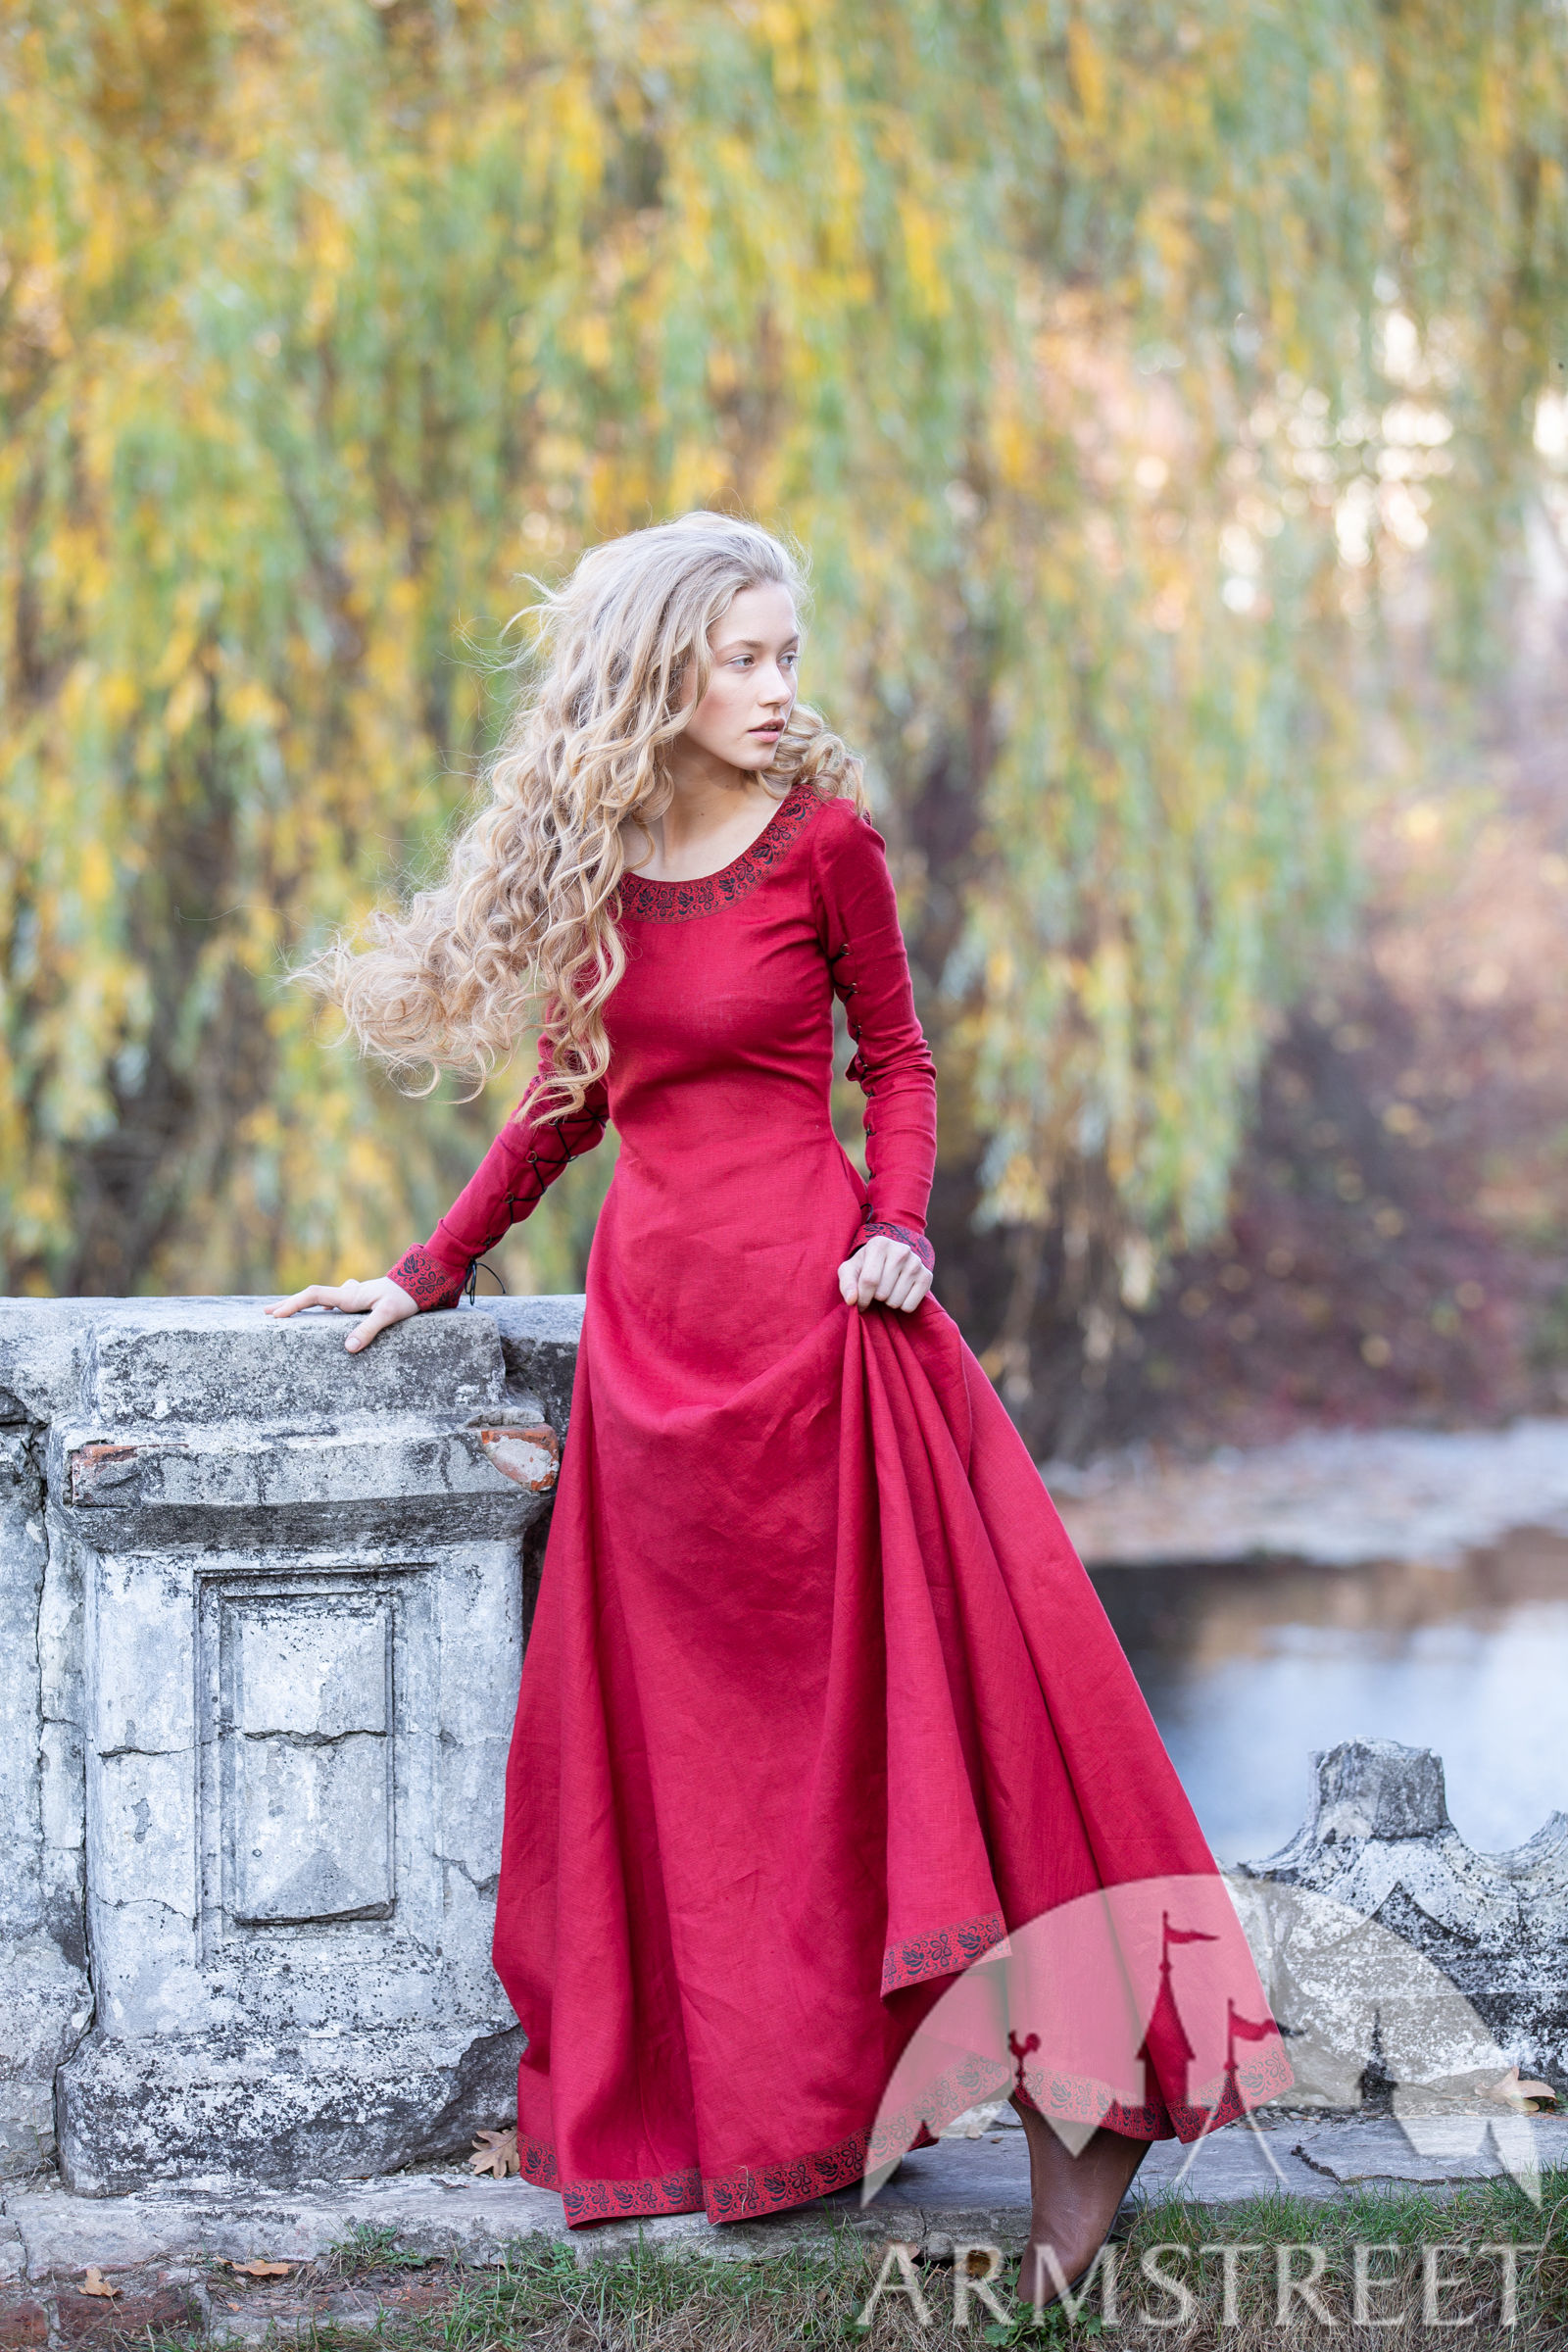 Fantasy linen dress "Autumn Princess" for sale. Available in green flax linen, blue flax linen